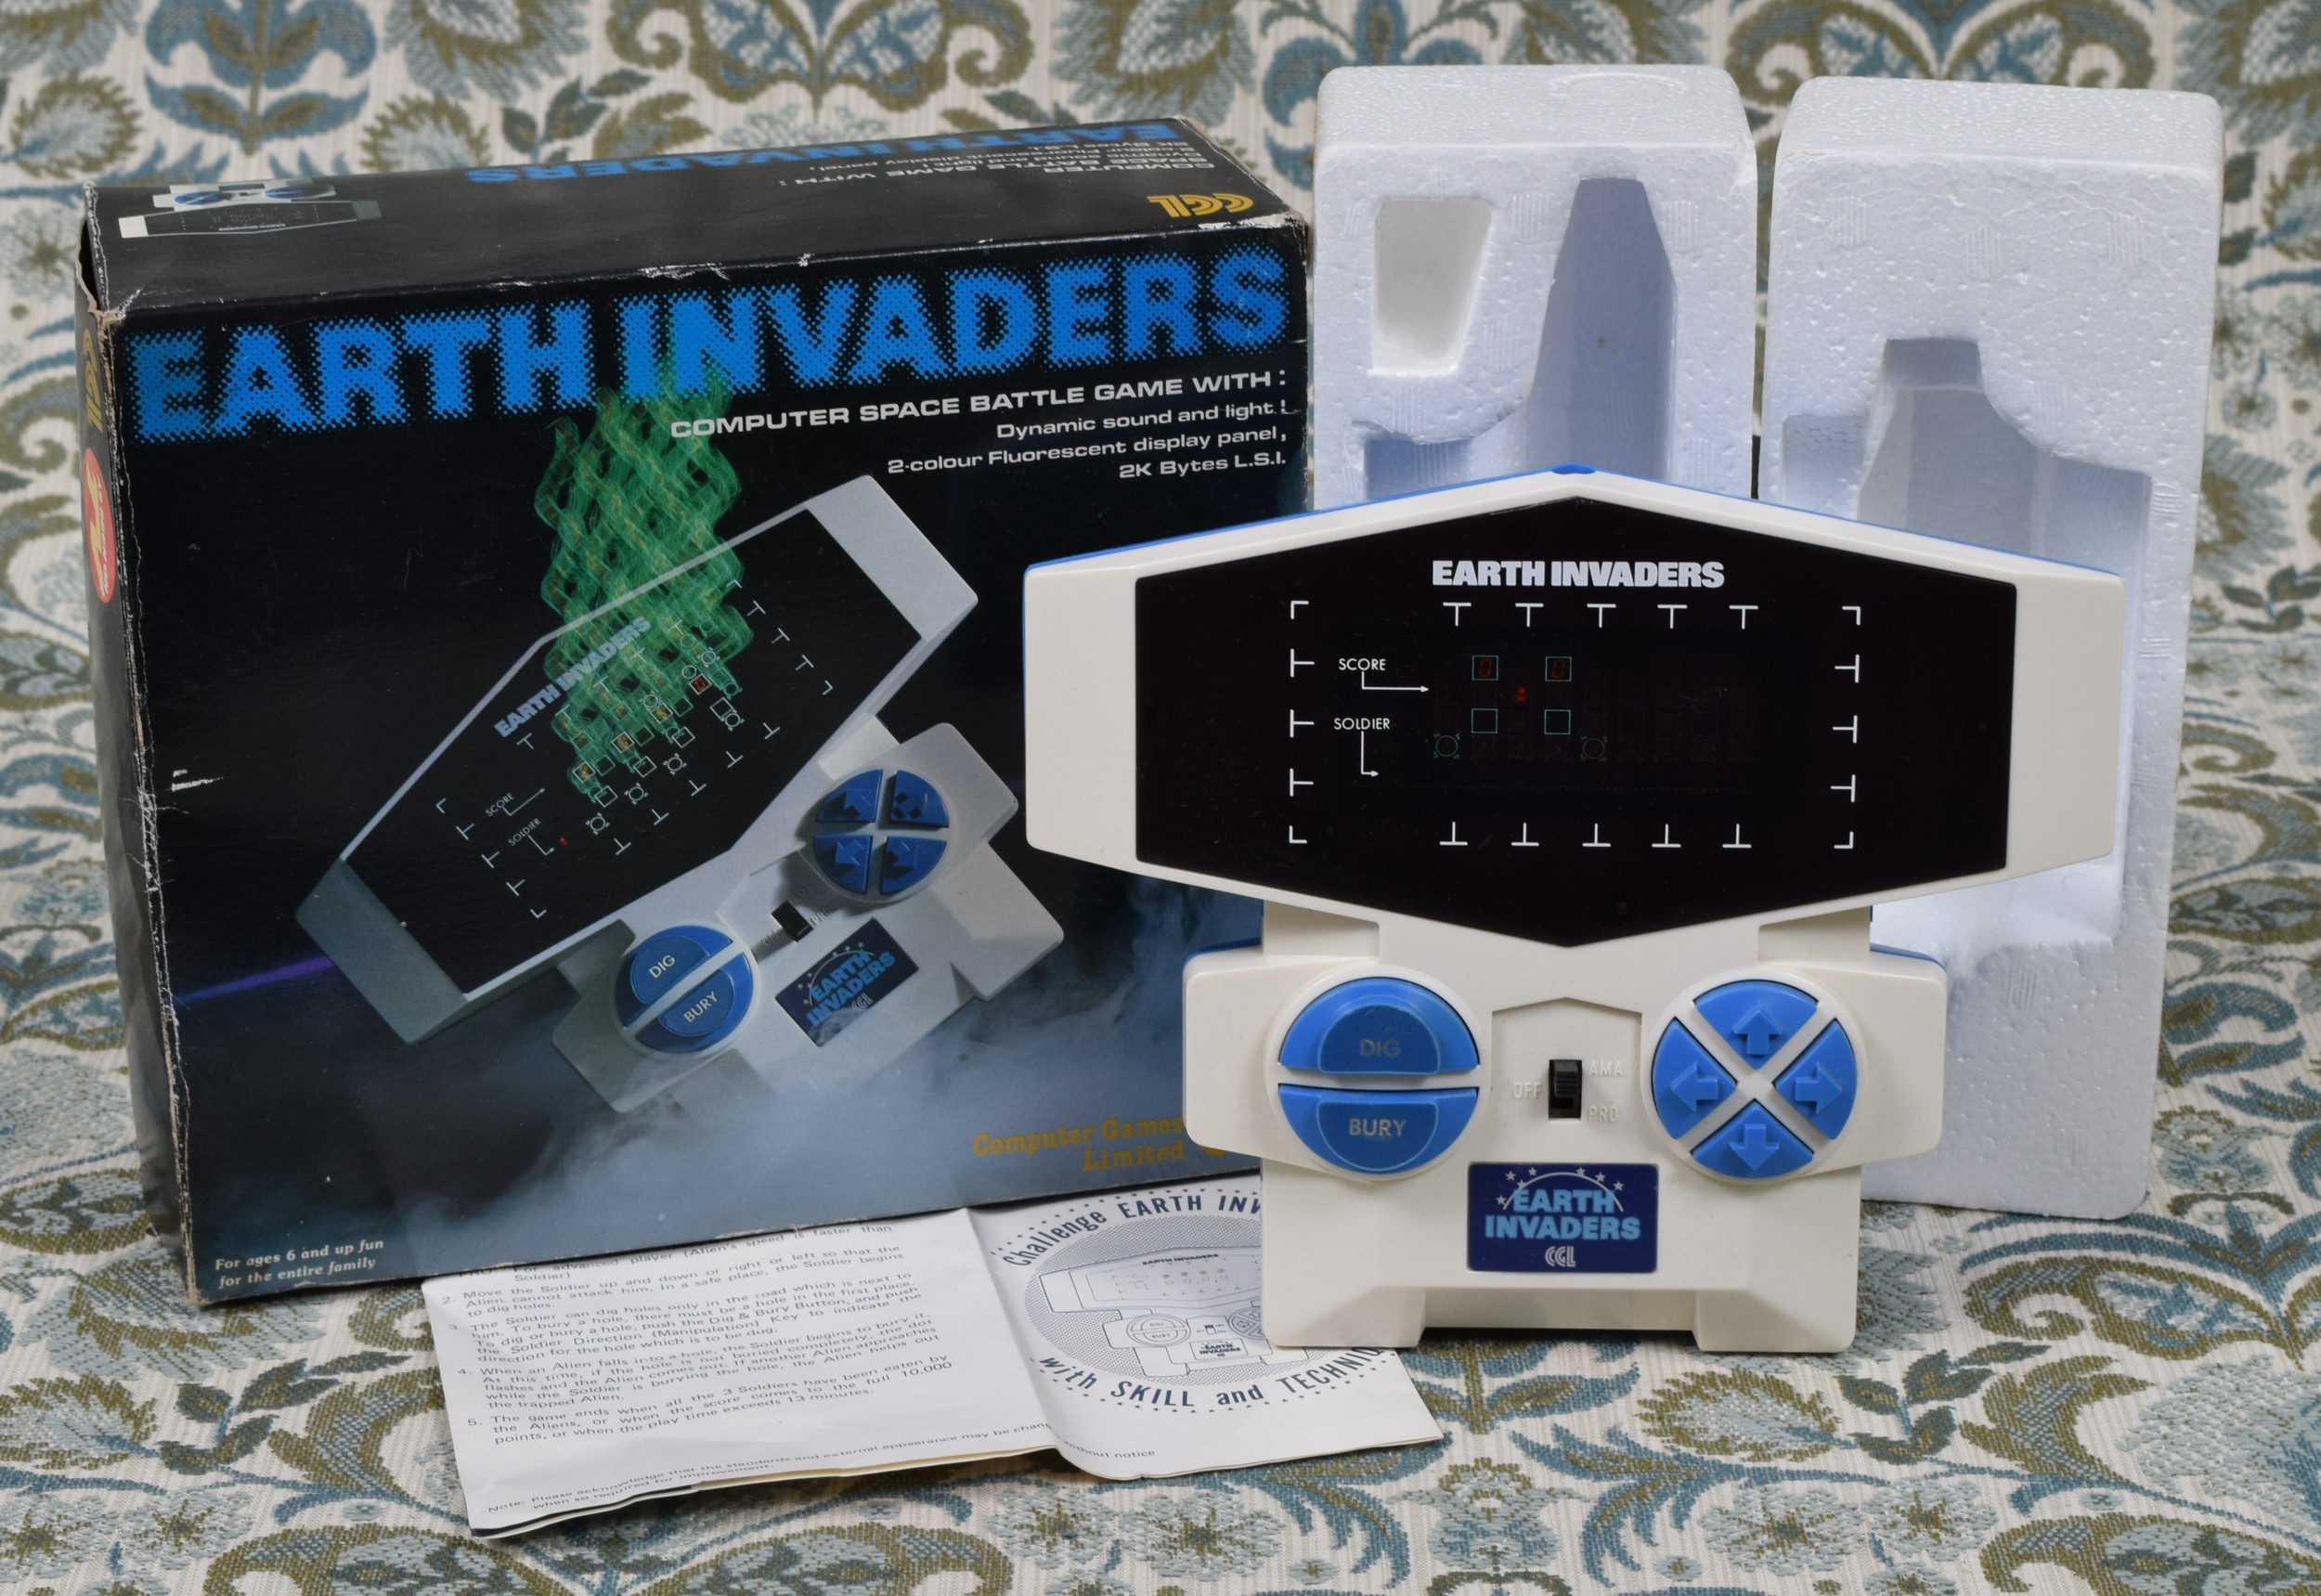 Retro Gaming & Technology - a Computer Games Limited (CGL) Earth Invaders handheld battle game